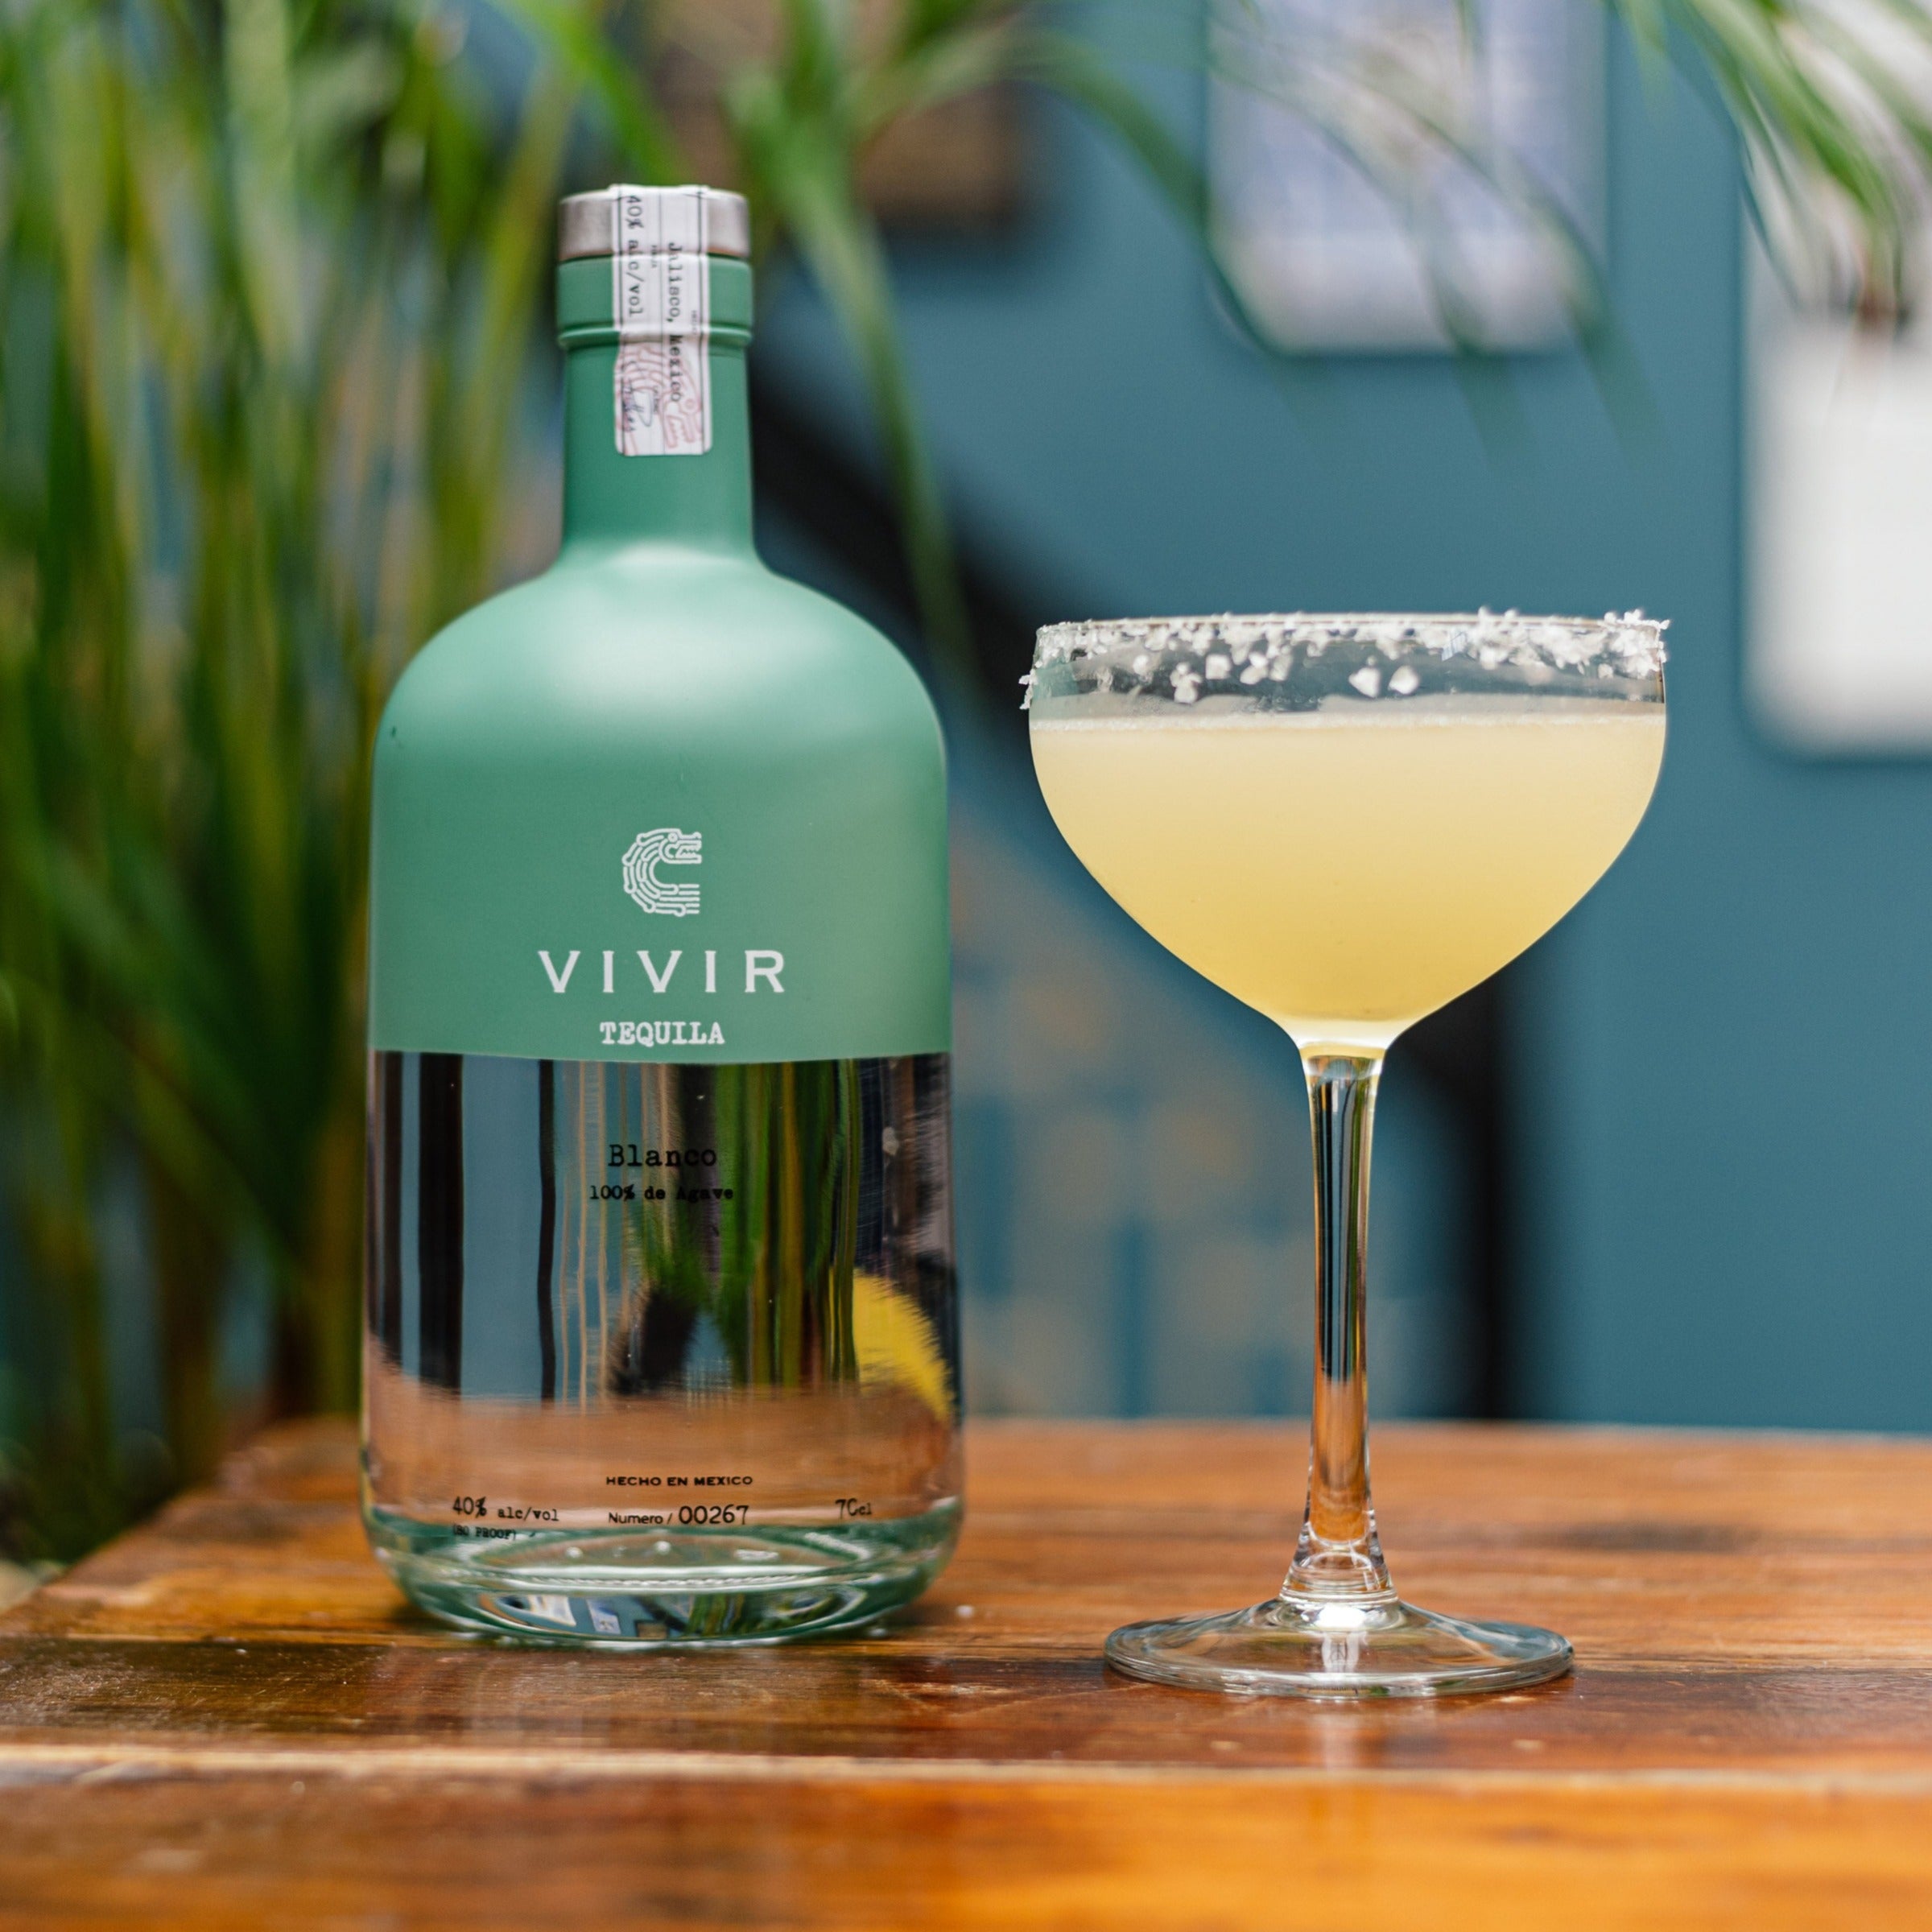 A bottle of VIVIR Tequila Blanco positioned next to a Margarita cocktail in a stemmed glass with a salt rim..